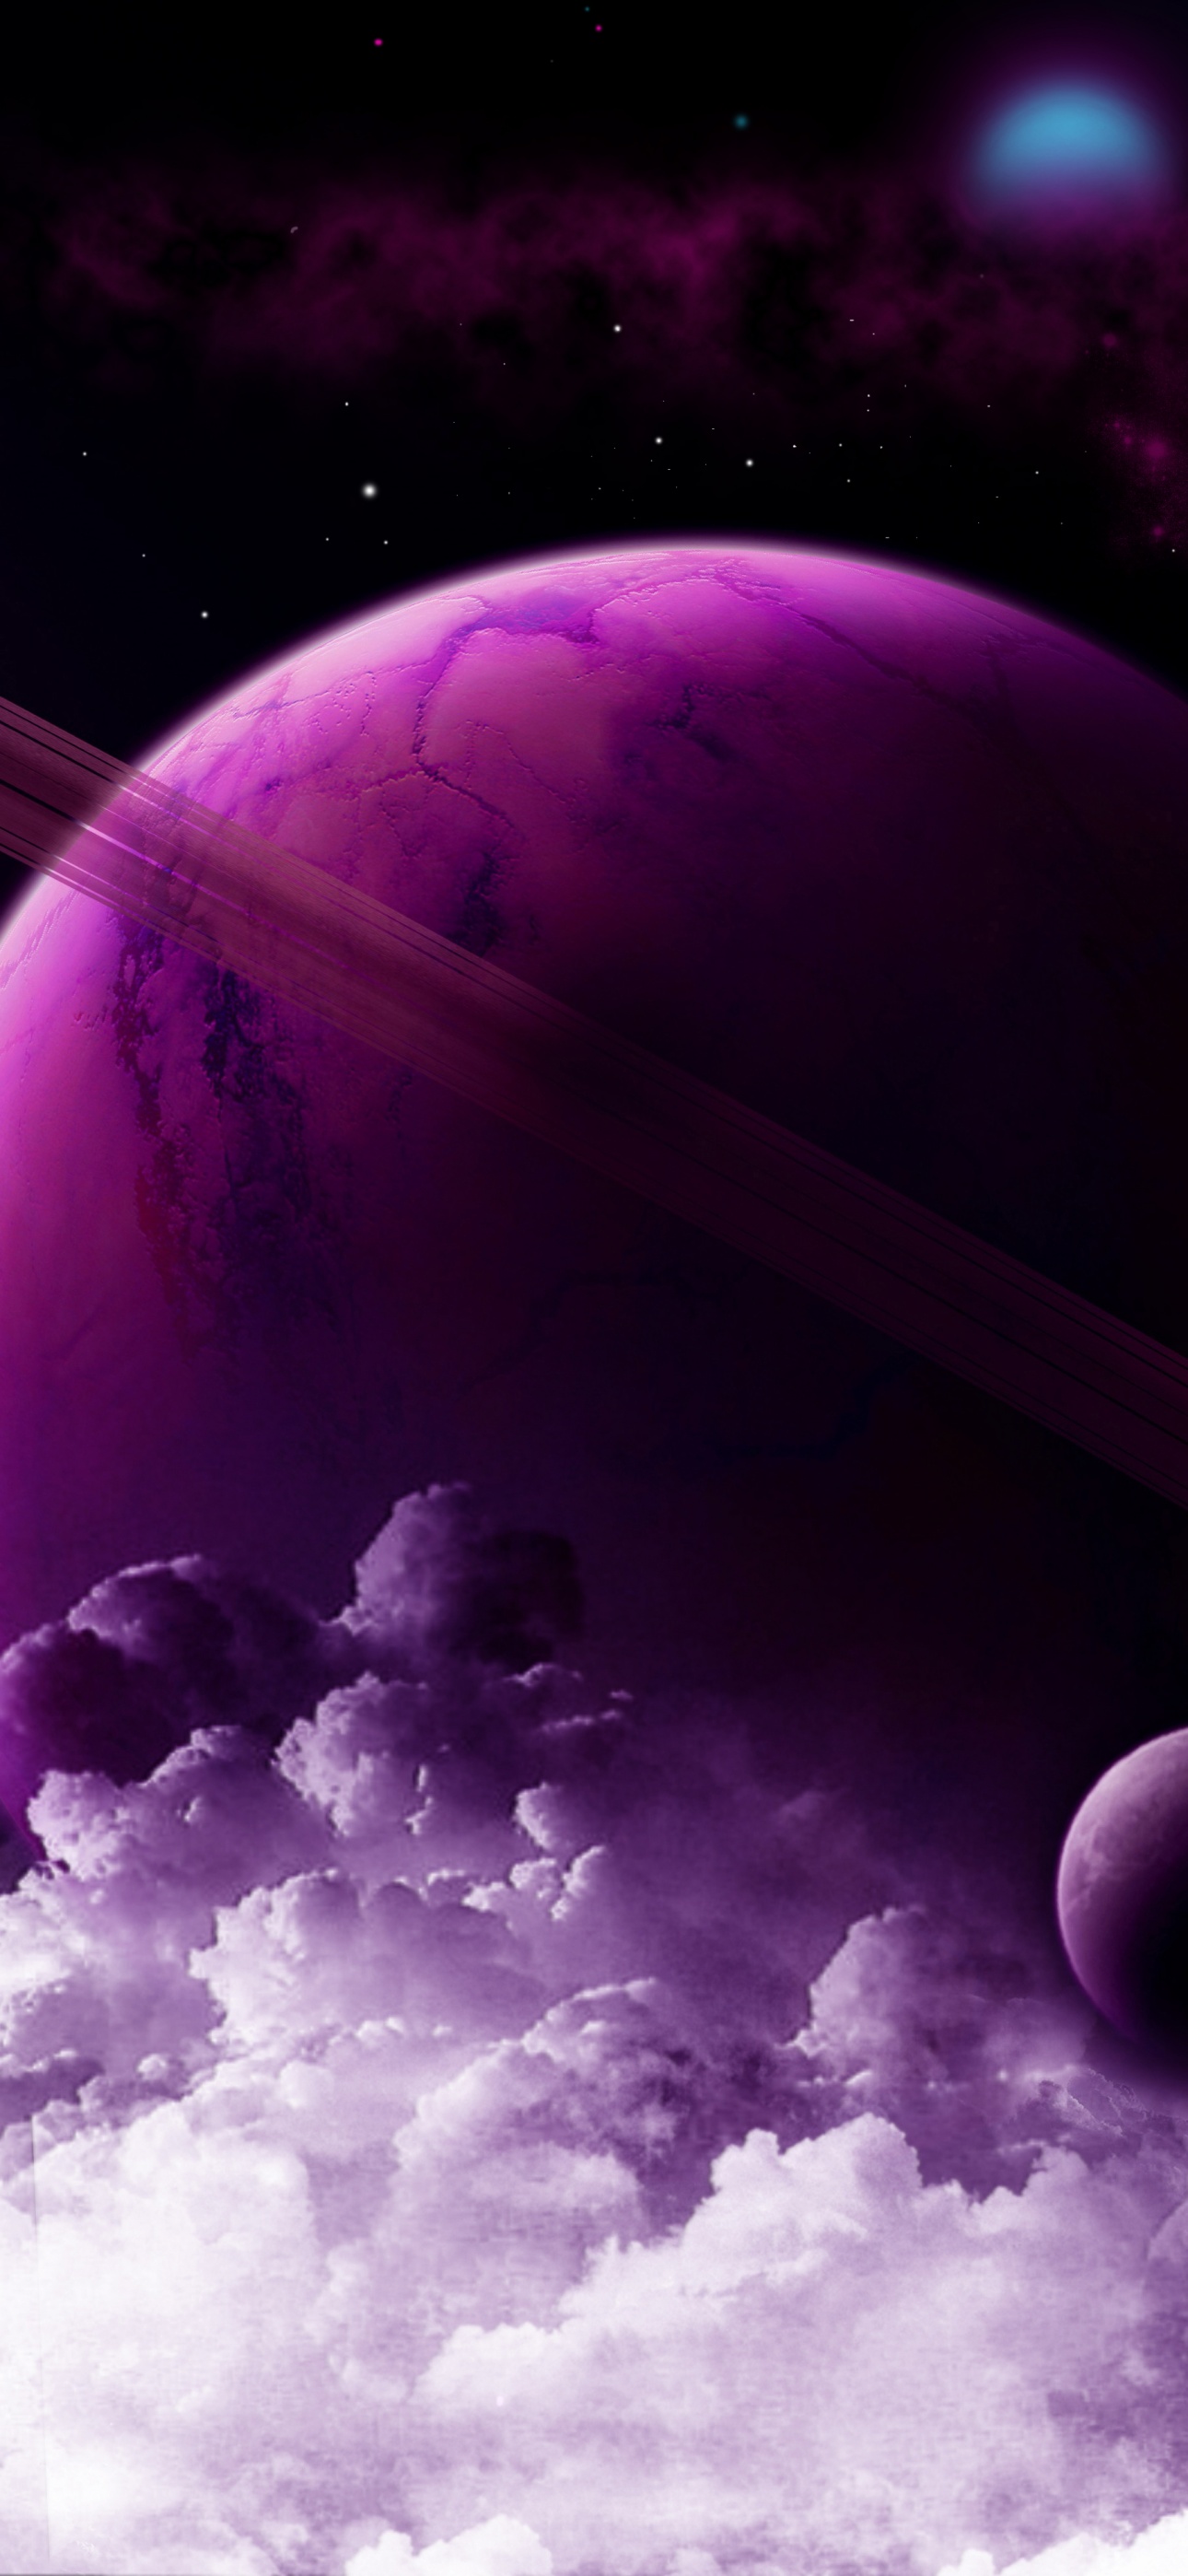 New High Res iPhone Wallpapers for Each Planet